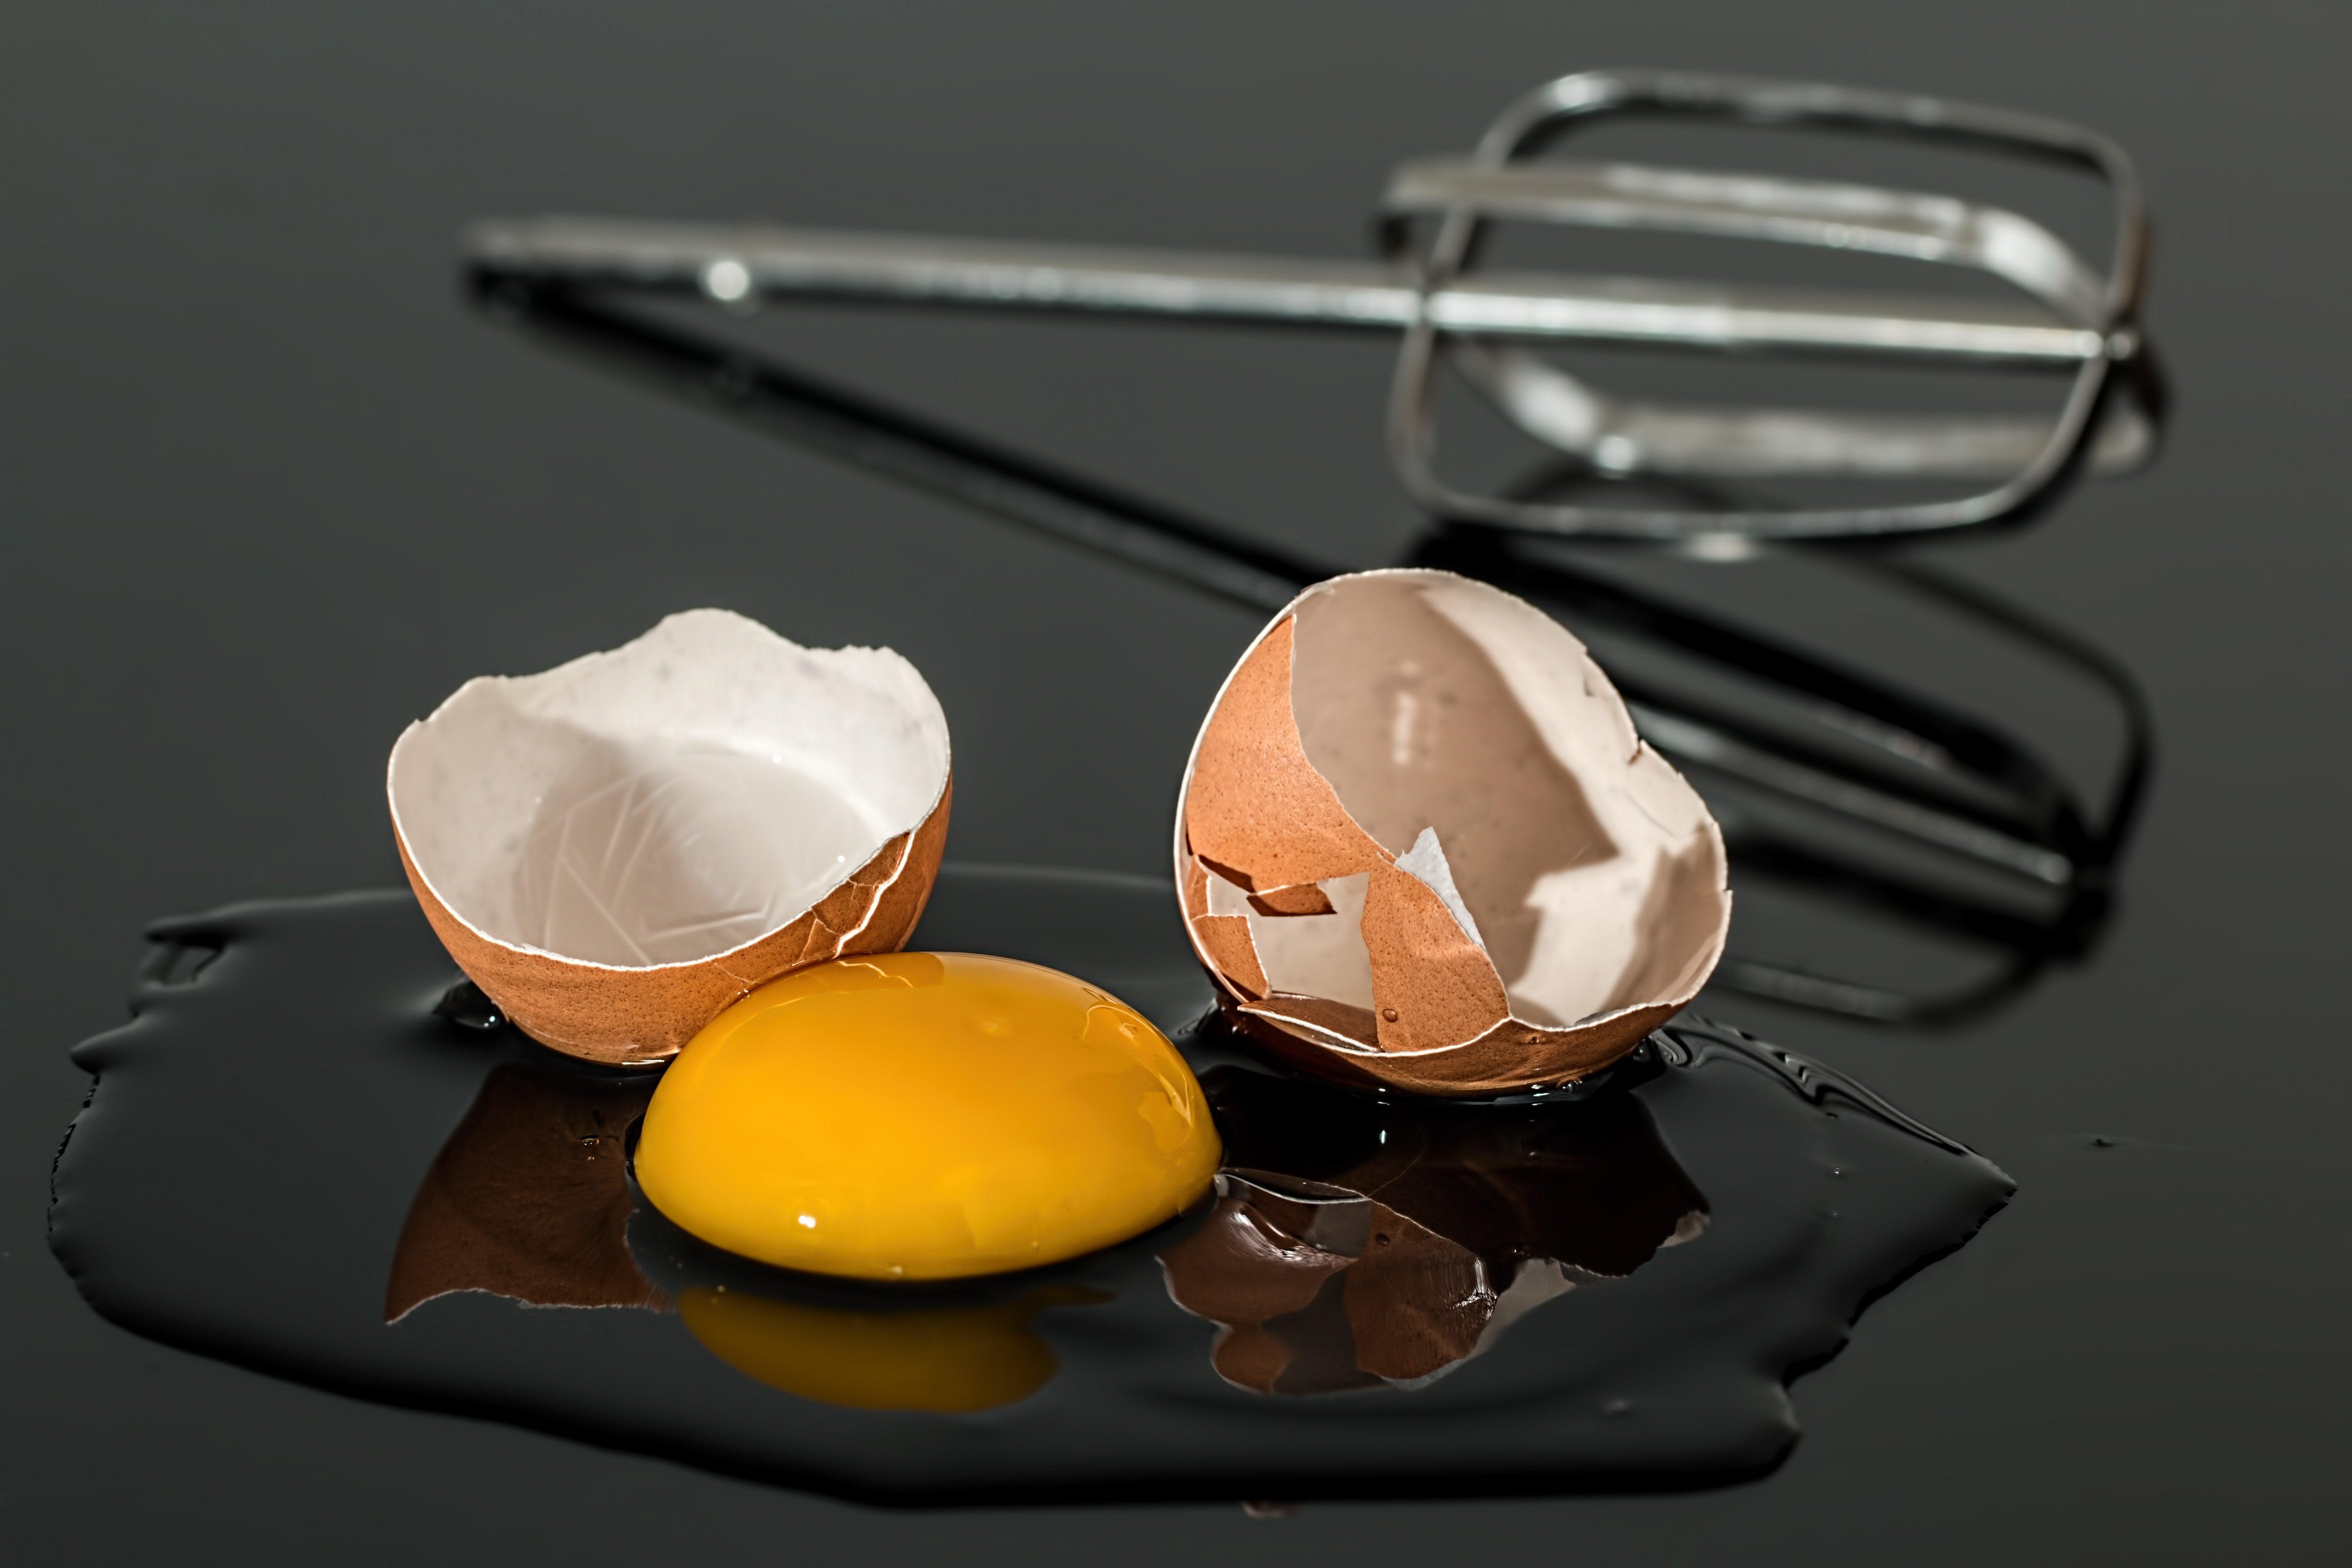 Cracked egg on a table with yolk and eggshells, whisk